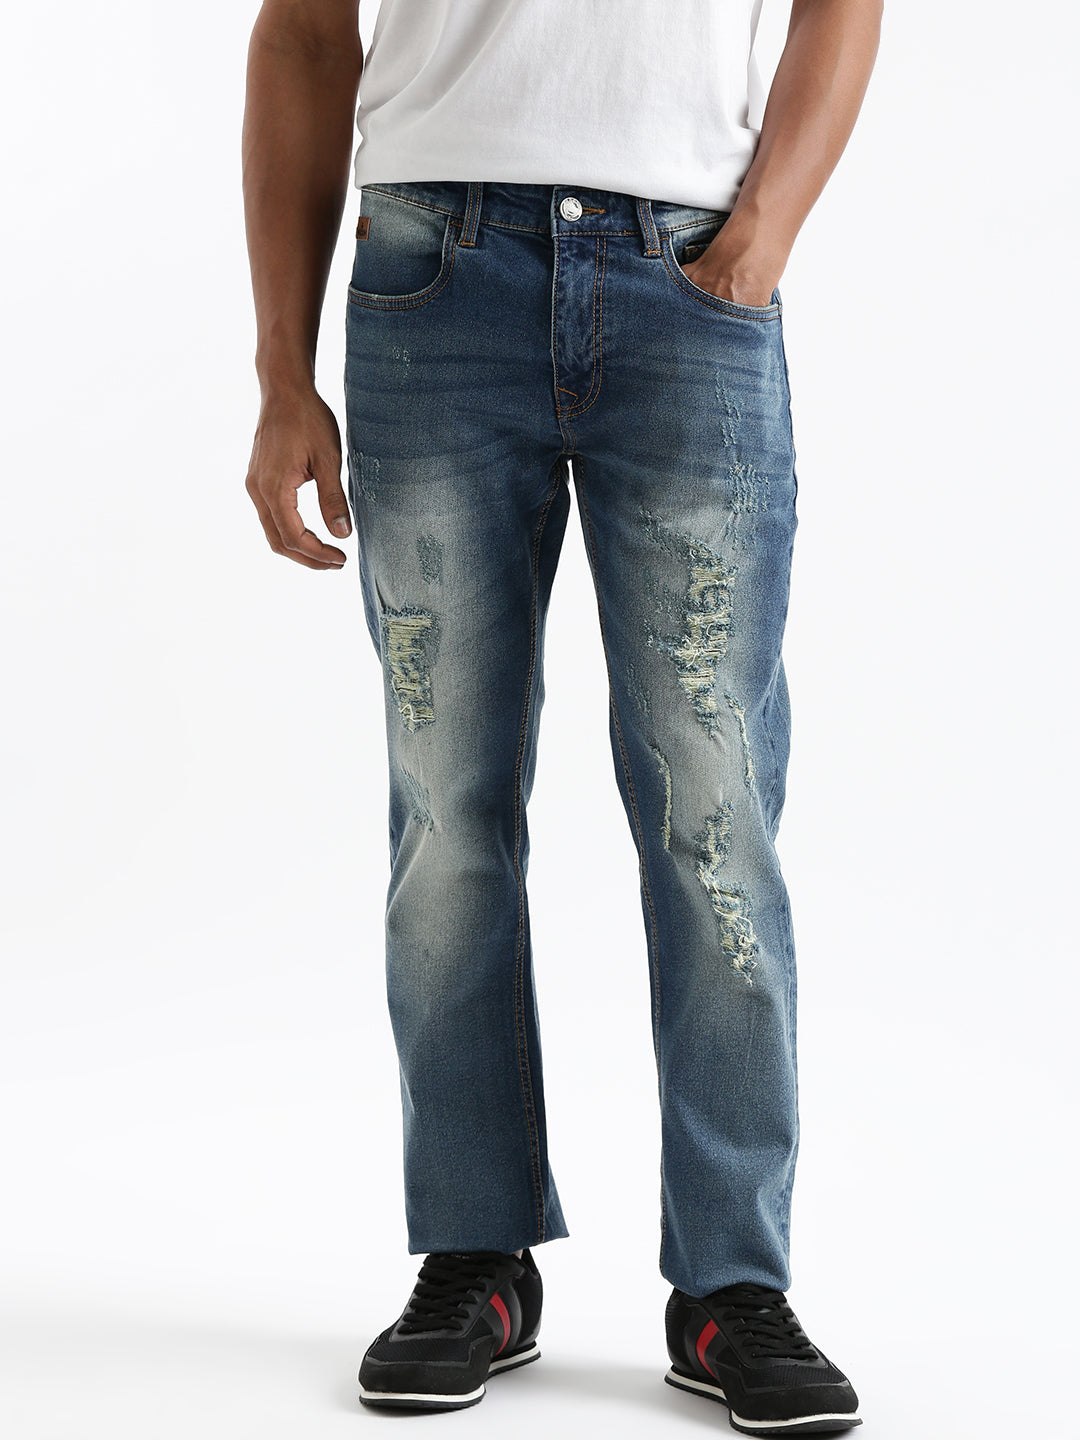 Faded Blue Distressed Jeans